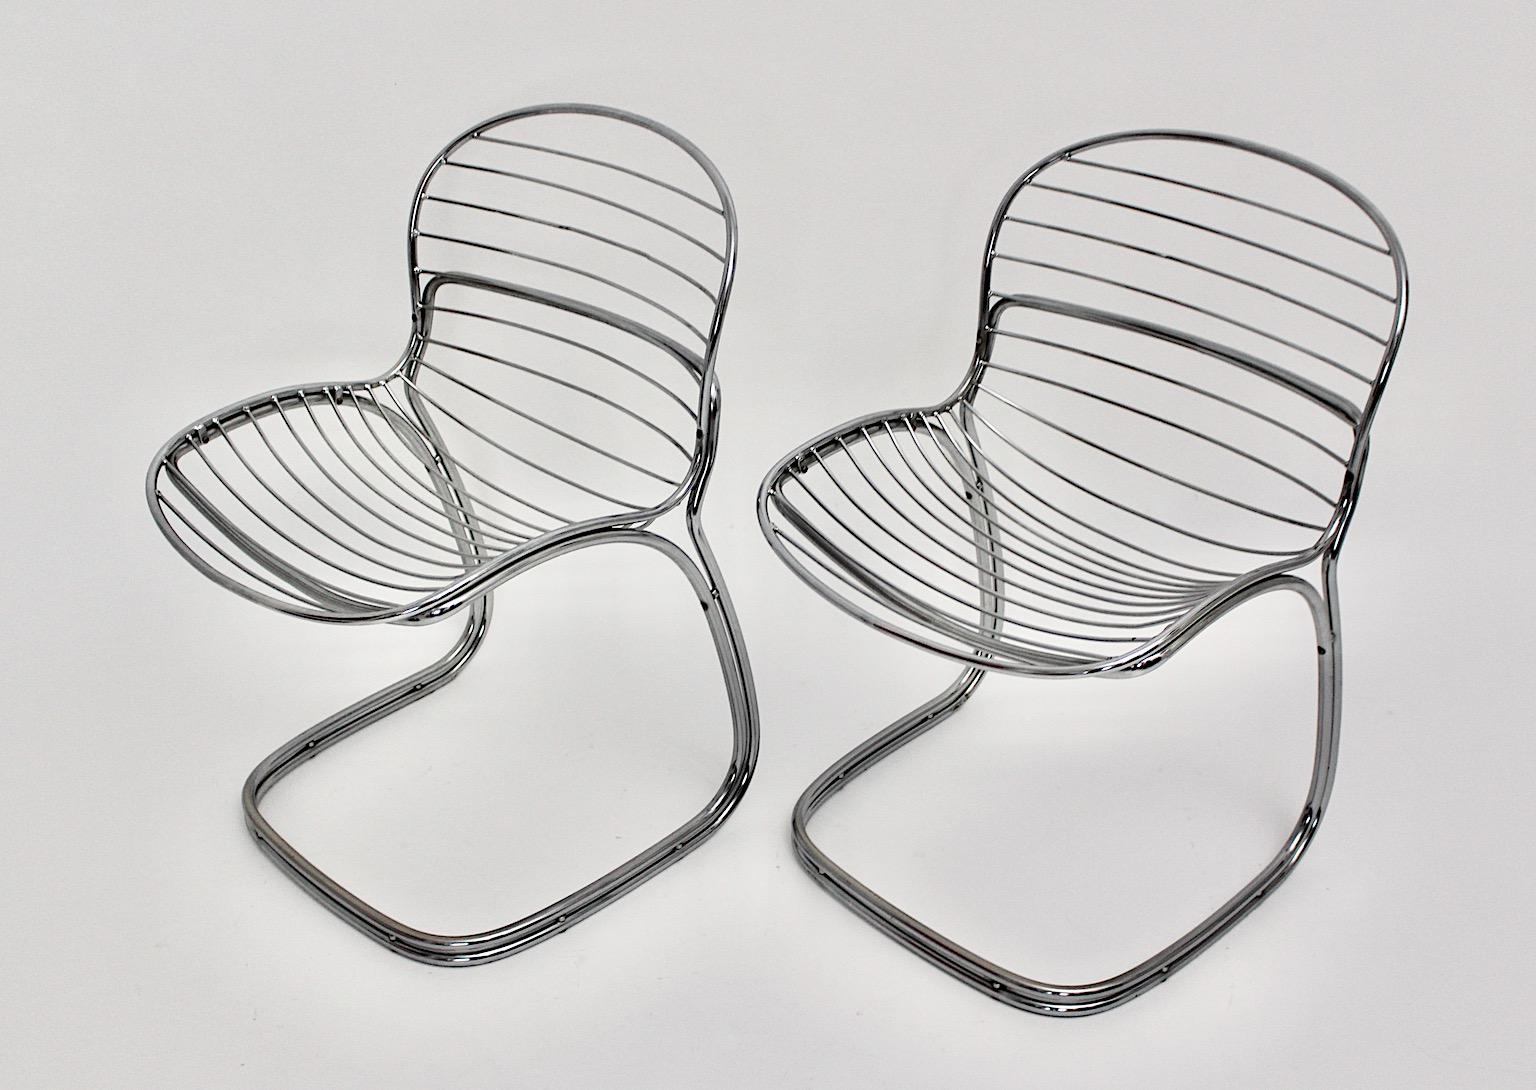 Space Age pair of vintage chairs from chromed tube steel model Sabrina for Rima, Italy, 1970s.
Slightly curved chromed tube steel floats from the seat and back into the base.
The design from the 1970s promises coolness and timeless. These chairs